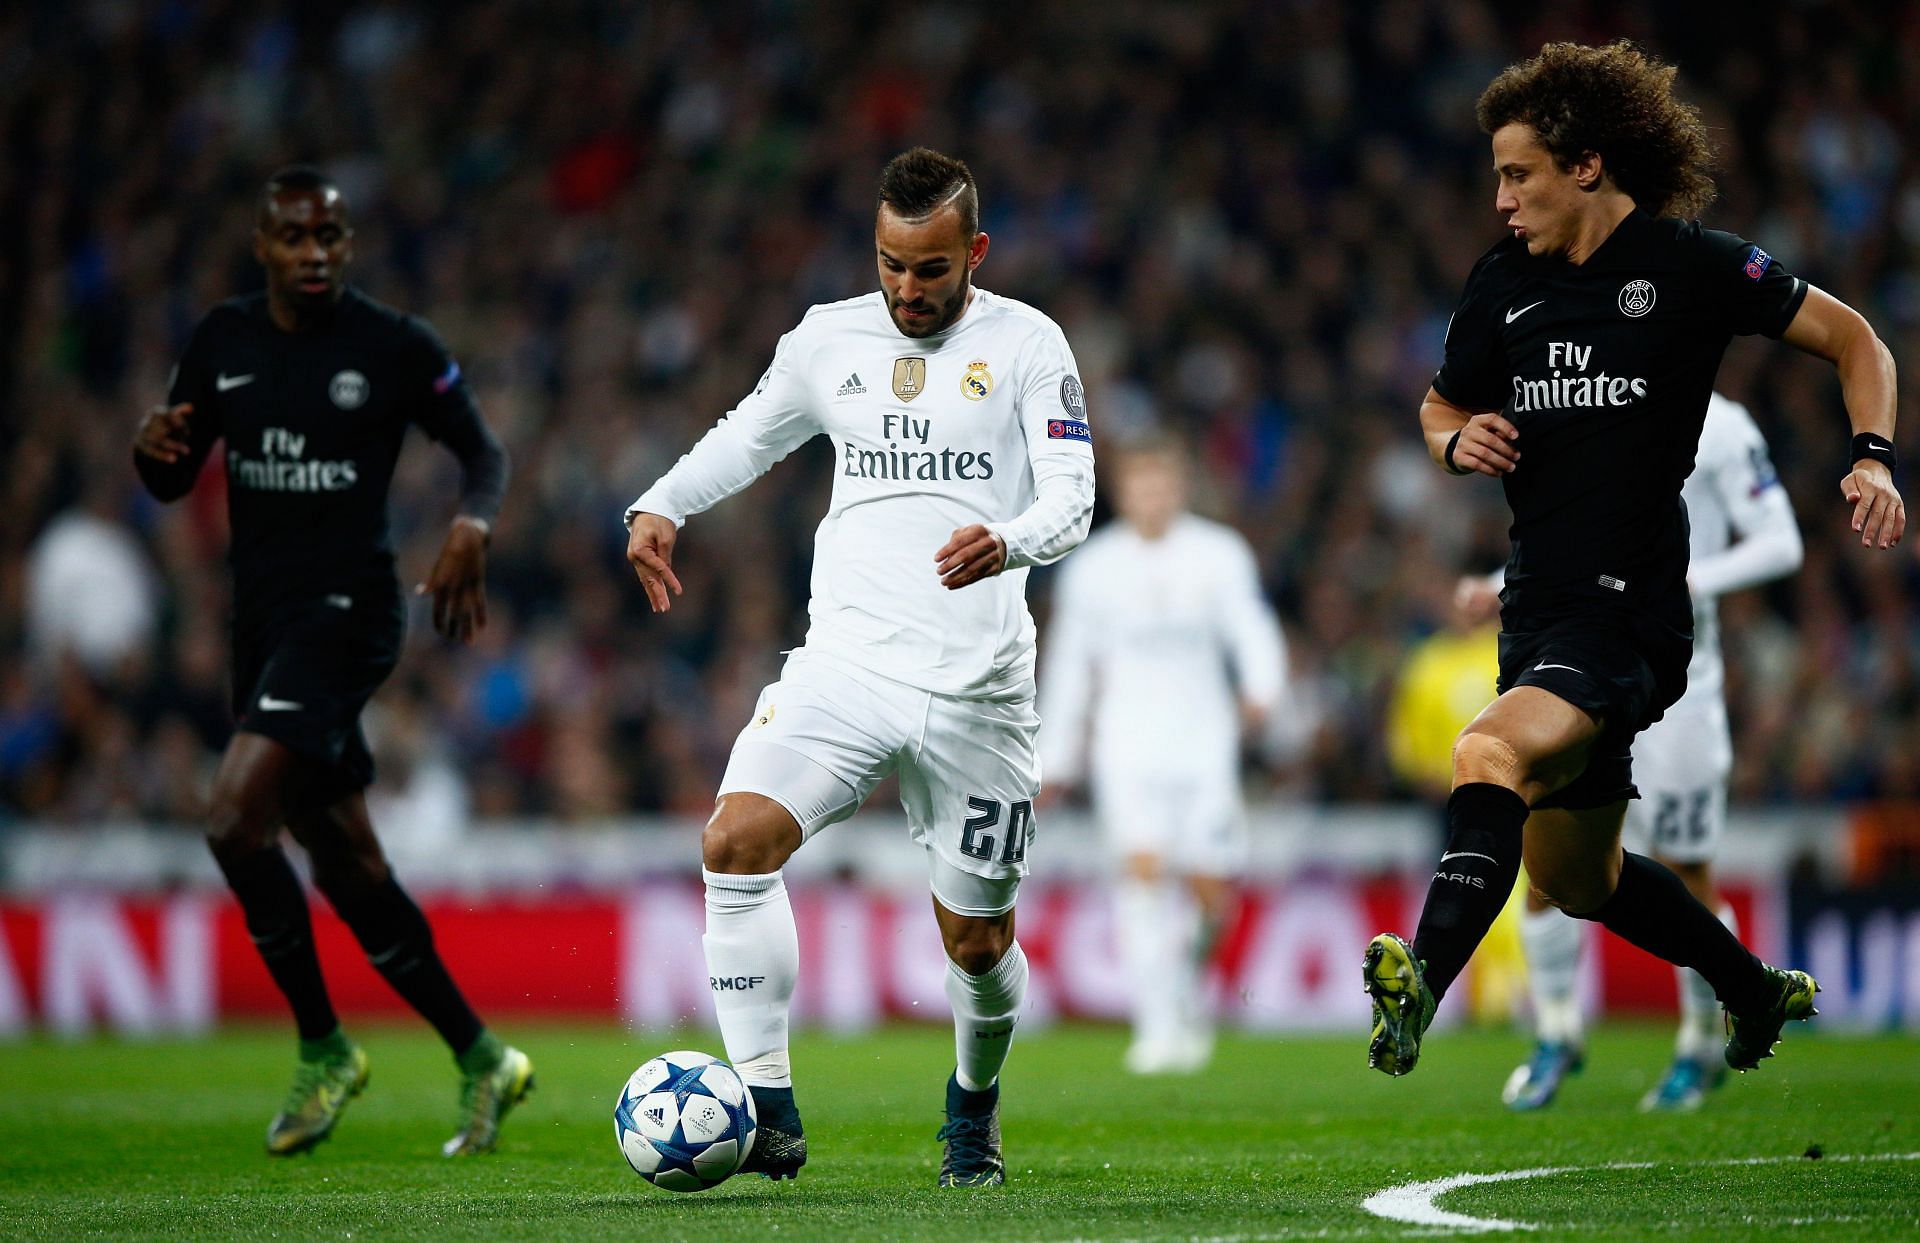 Jese playing for Real against PSG in the Champions League